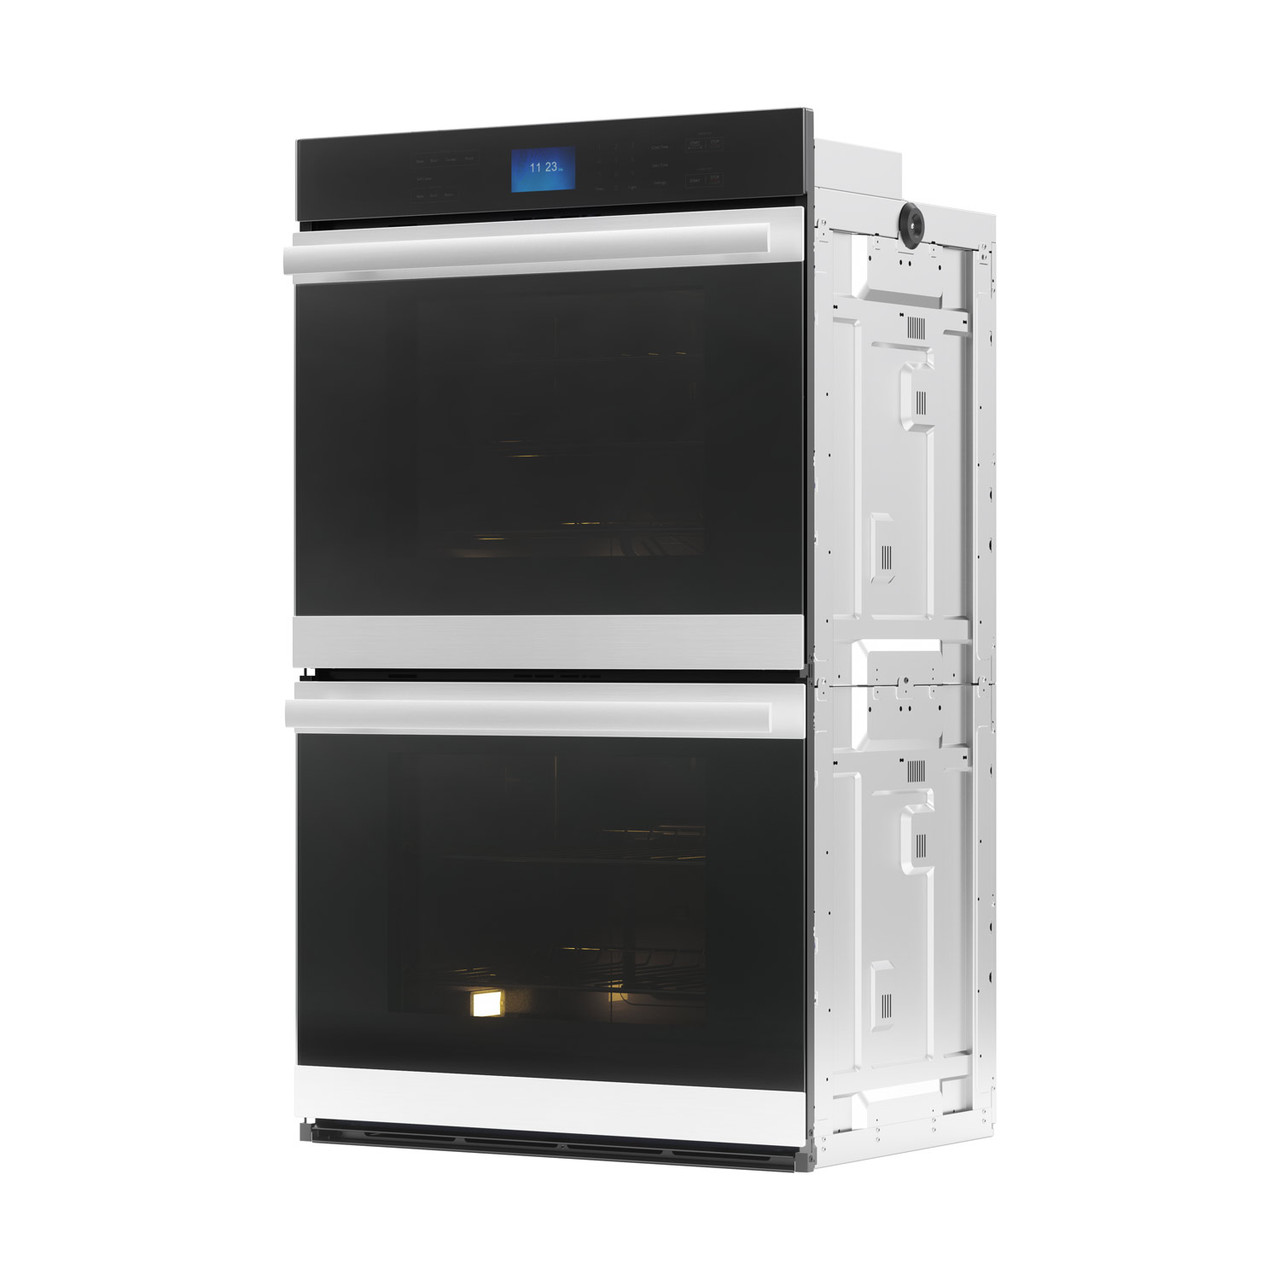 Sharp Built-In Double Wall Oven (SWB3062GS) Left Angle View